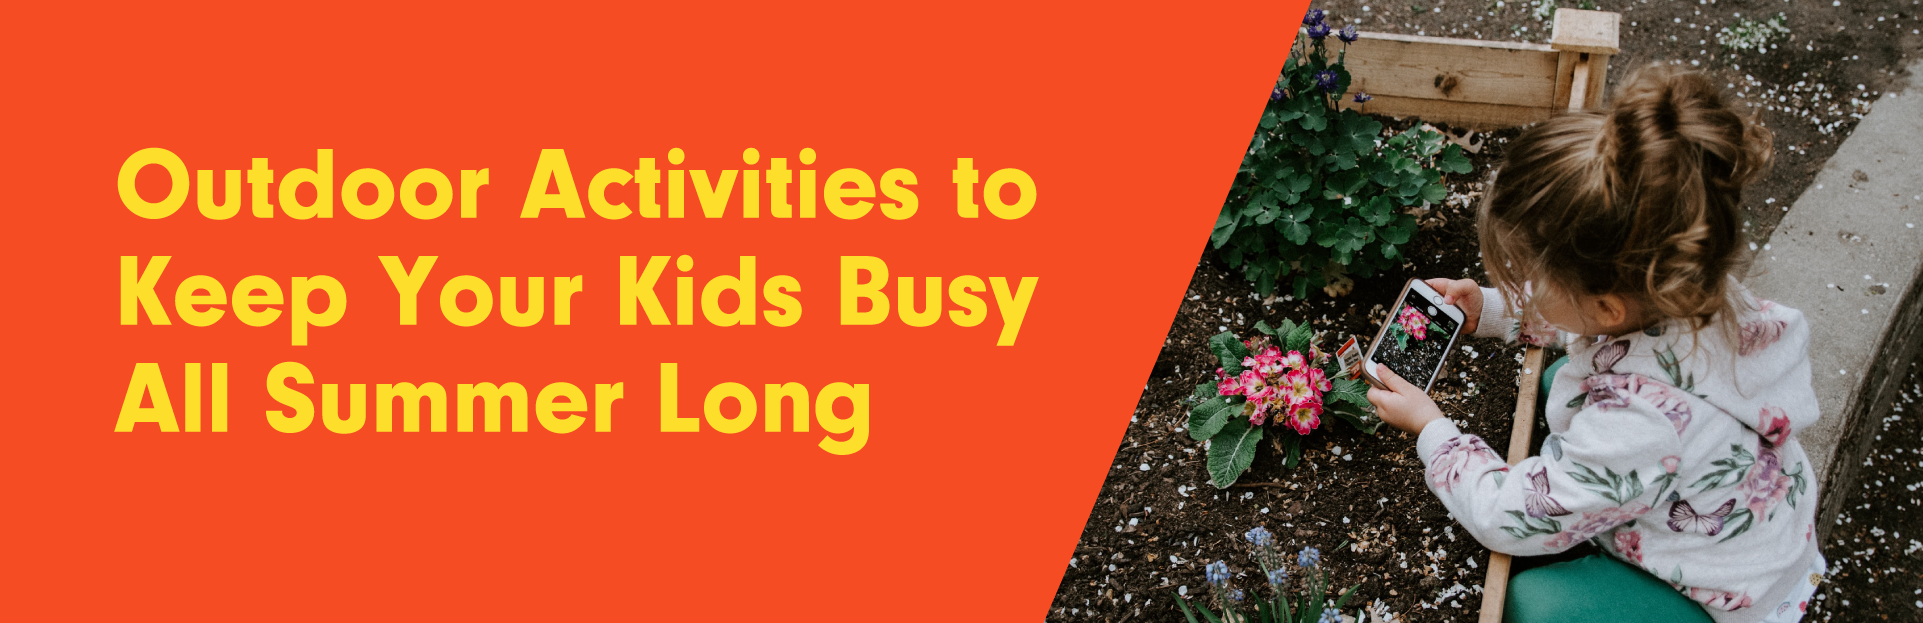 Outdoor Activities to Keep Your Kids Busy All Summer Long